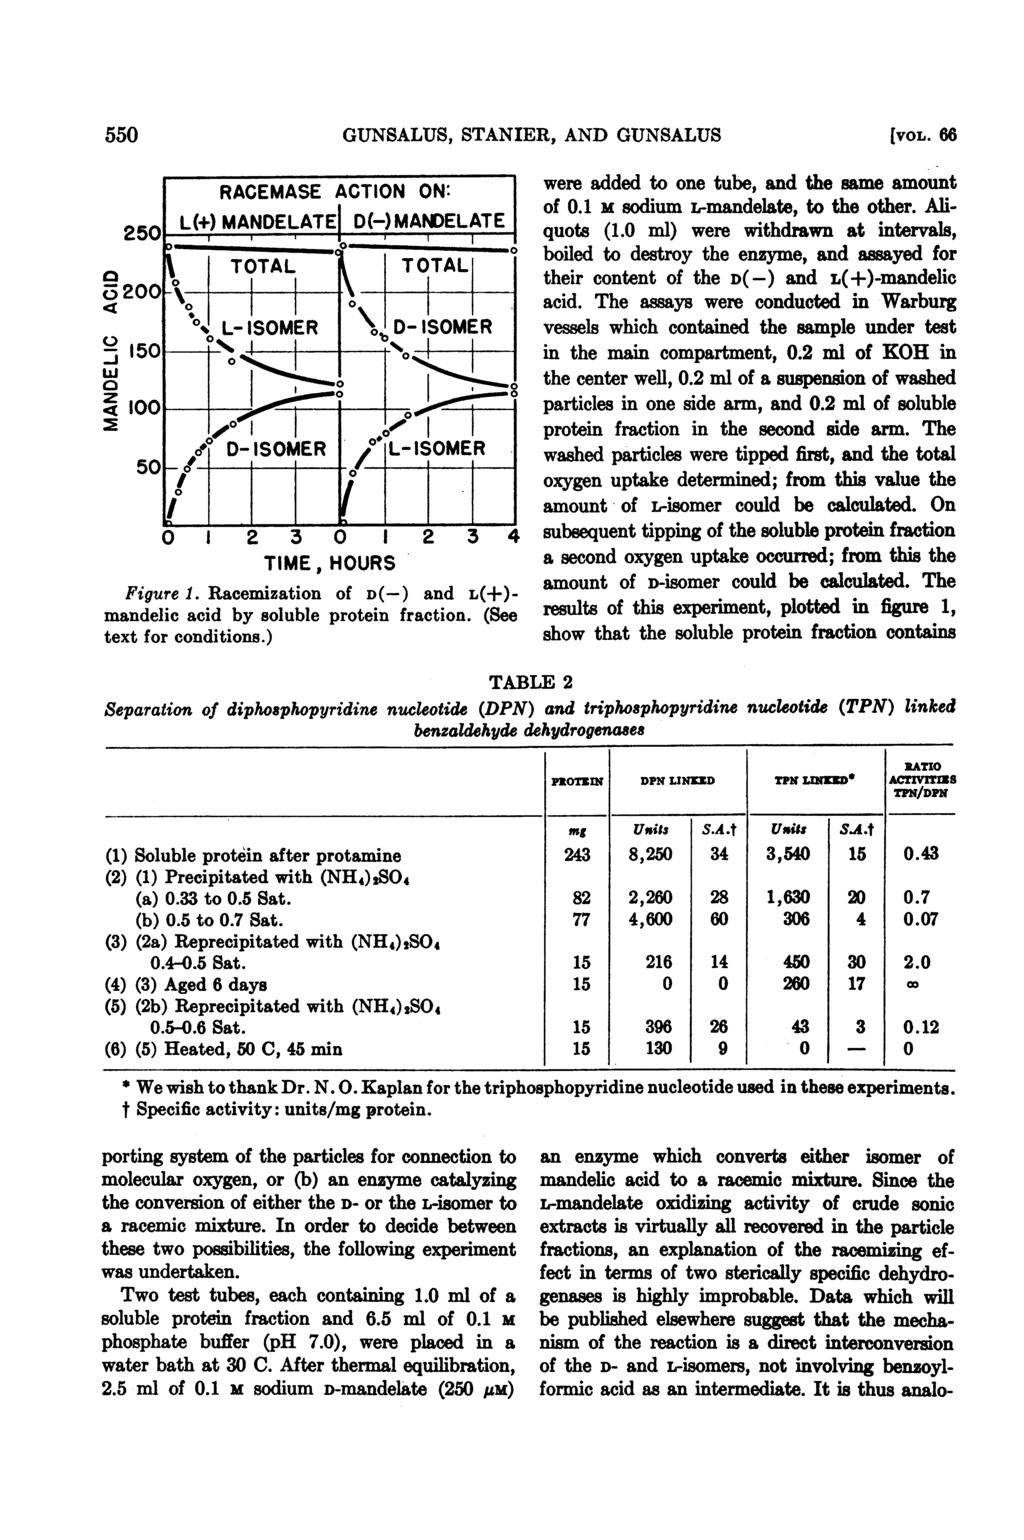 550 GUNSALUS, STANIER, AND GUJNSALUS [VOL. 66 TIME, HOURS Figure 1. Racemization of D(-) and L(+)- mandelic acid by soluble protein fraction. (See text for conditions.